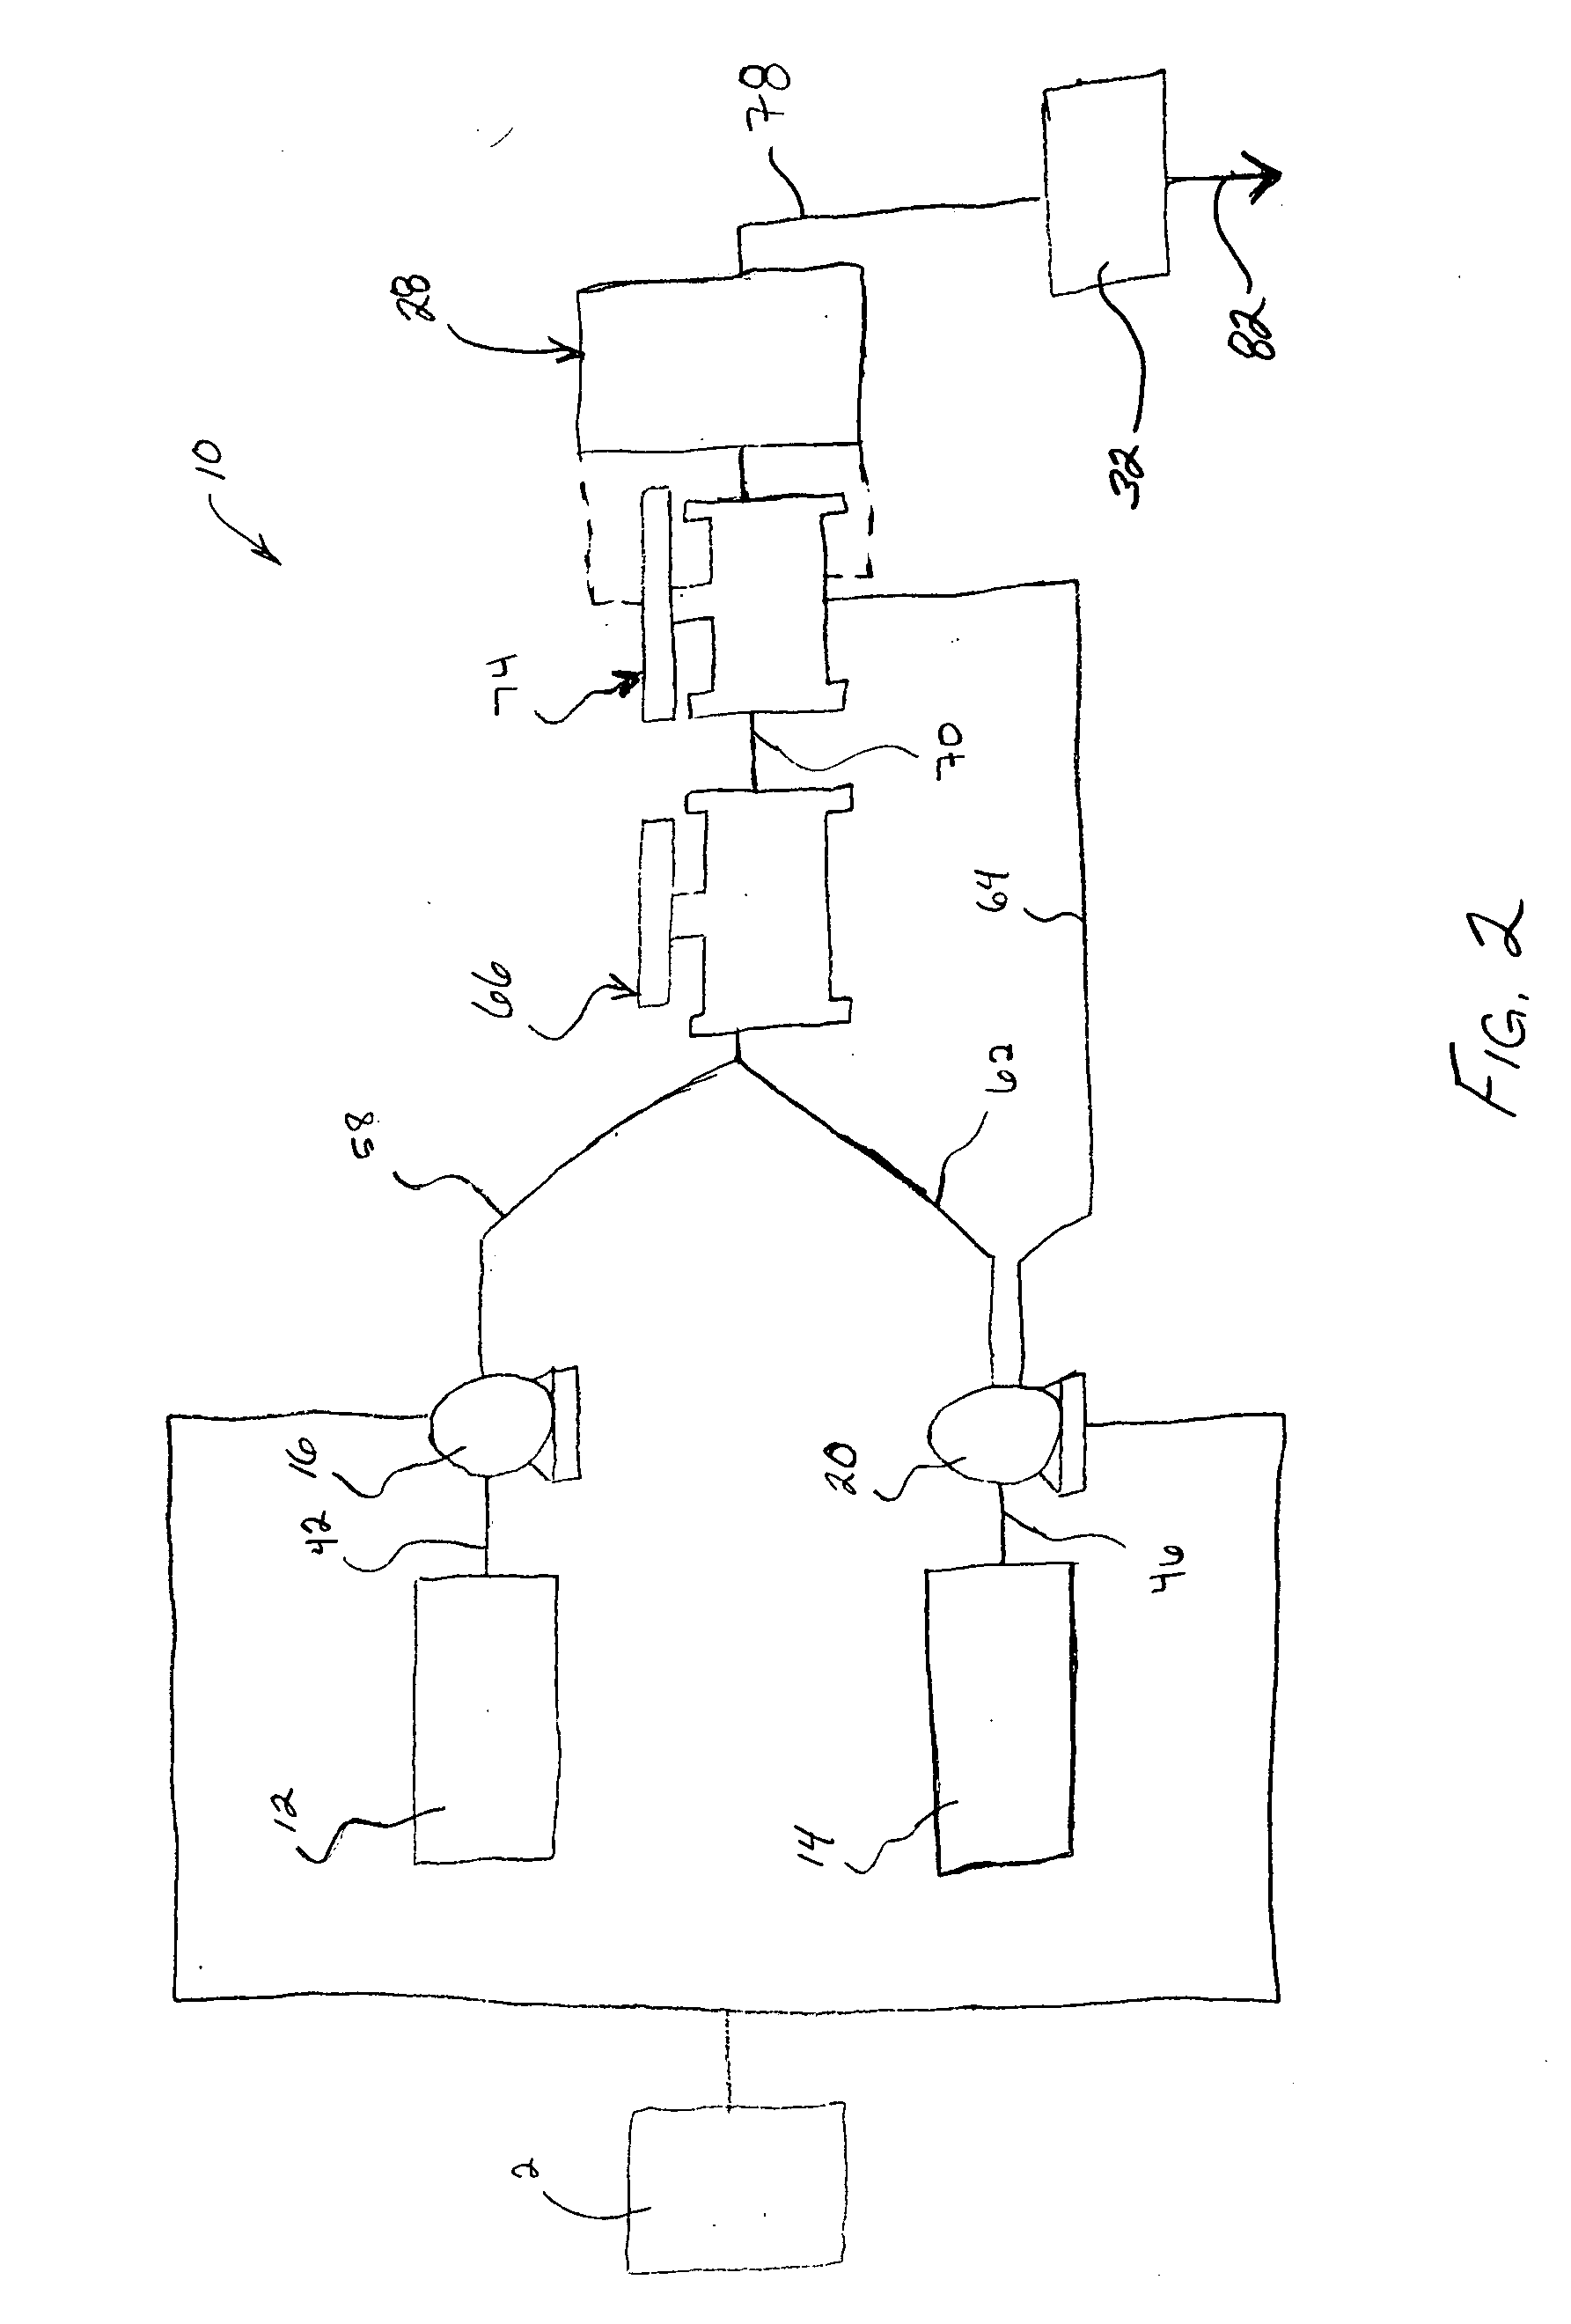 Method and system for manufacture and delivery of an emulsion explosive